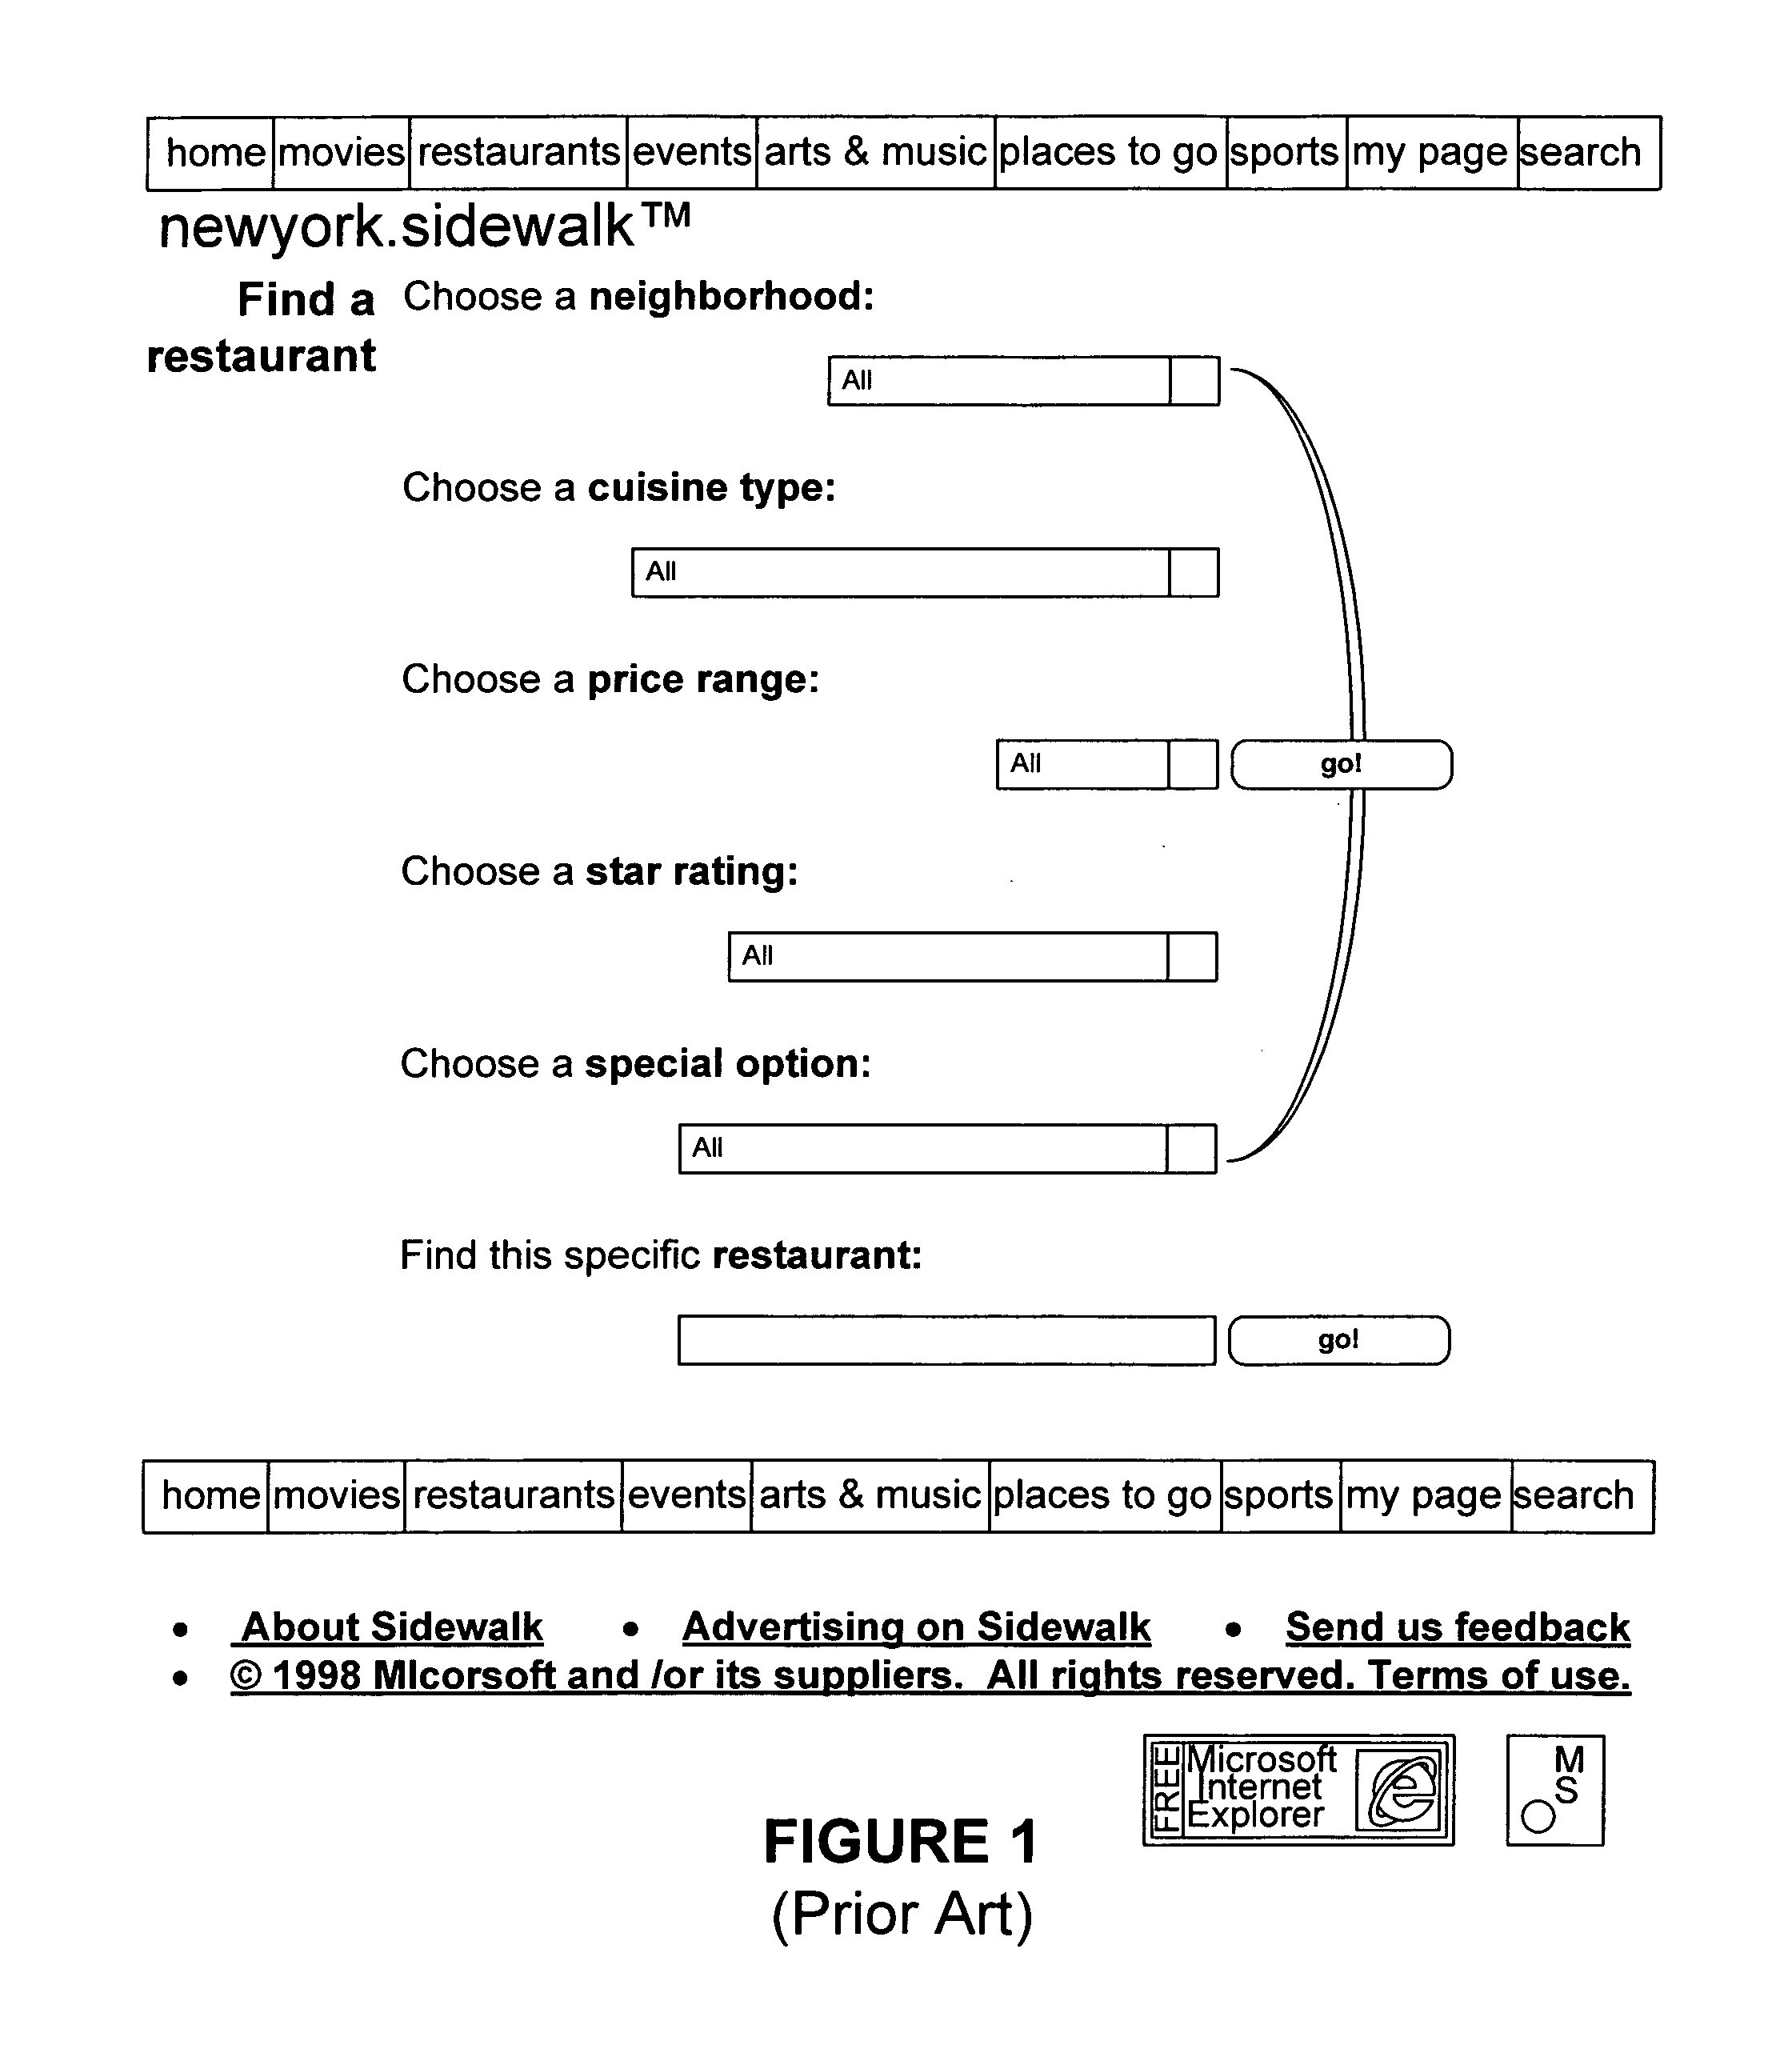 Methods, apparatus, and data structures for annotating a database design schema and/or indexing annotations